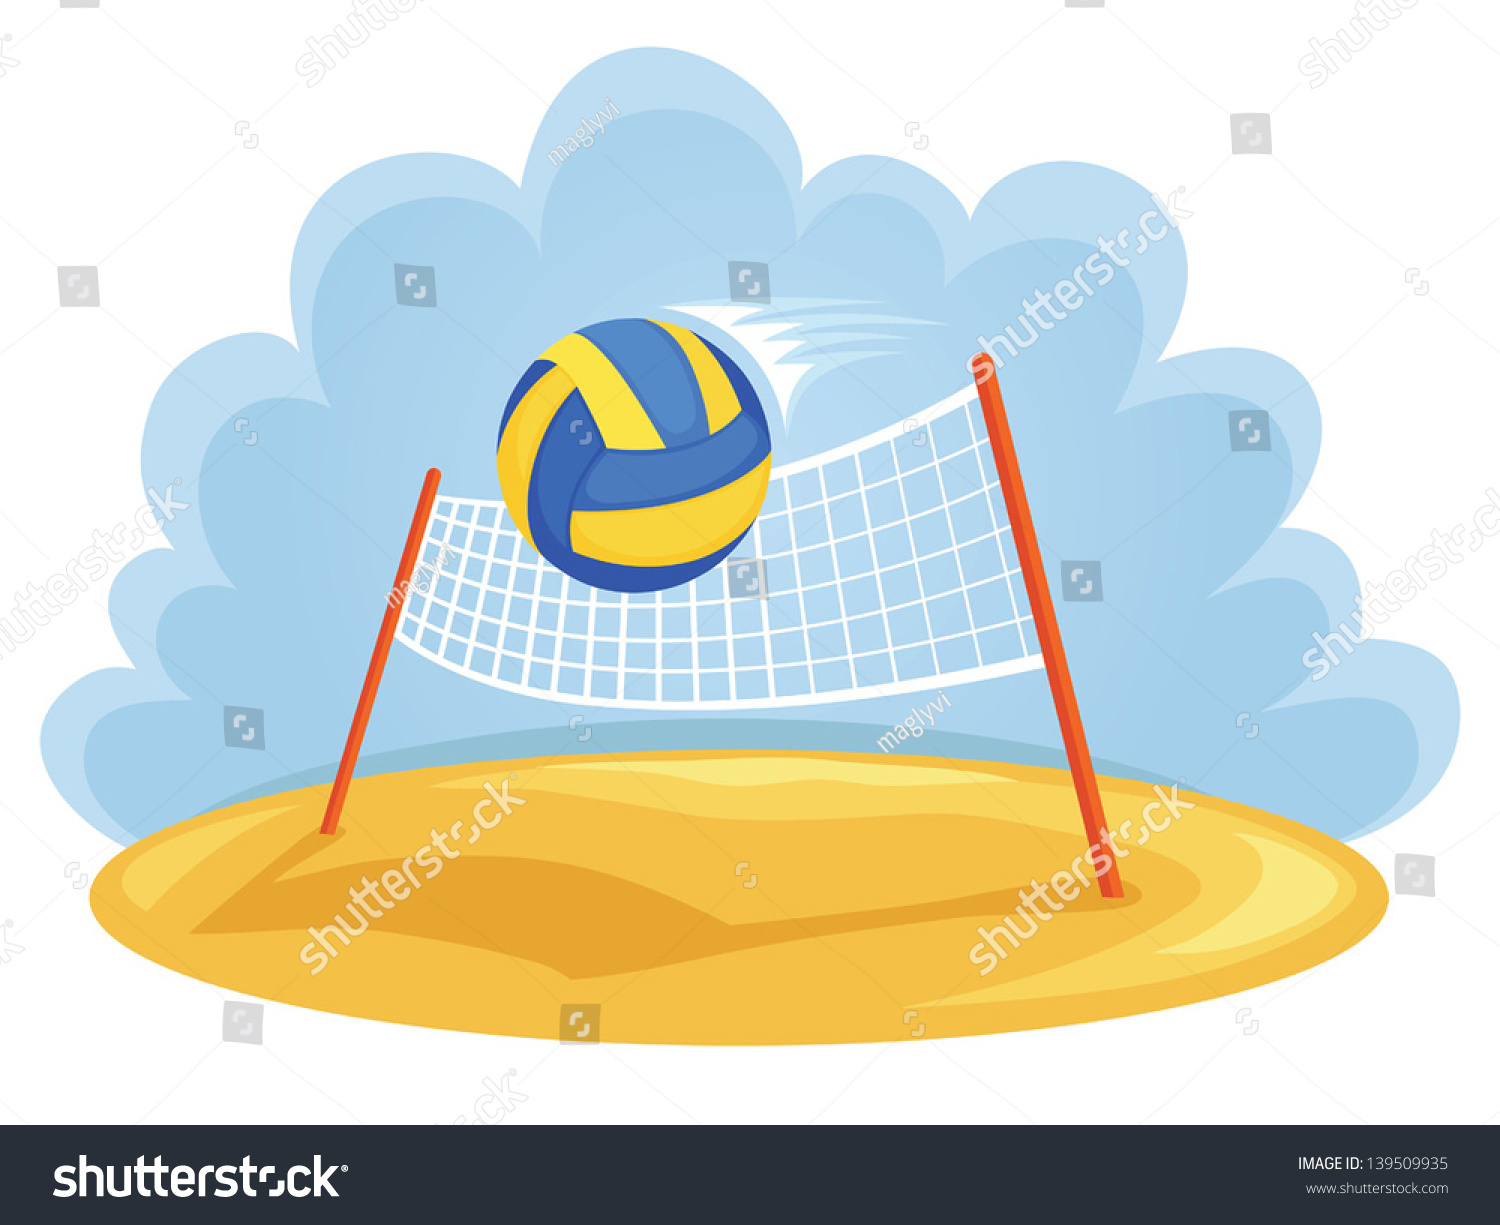 Vector Illustration Of Volleyball Net And Ball - 139509935 : Shutterstock